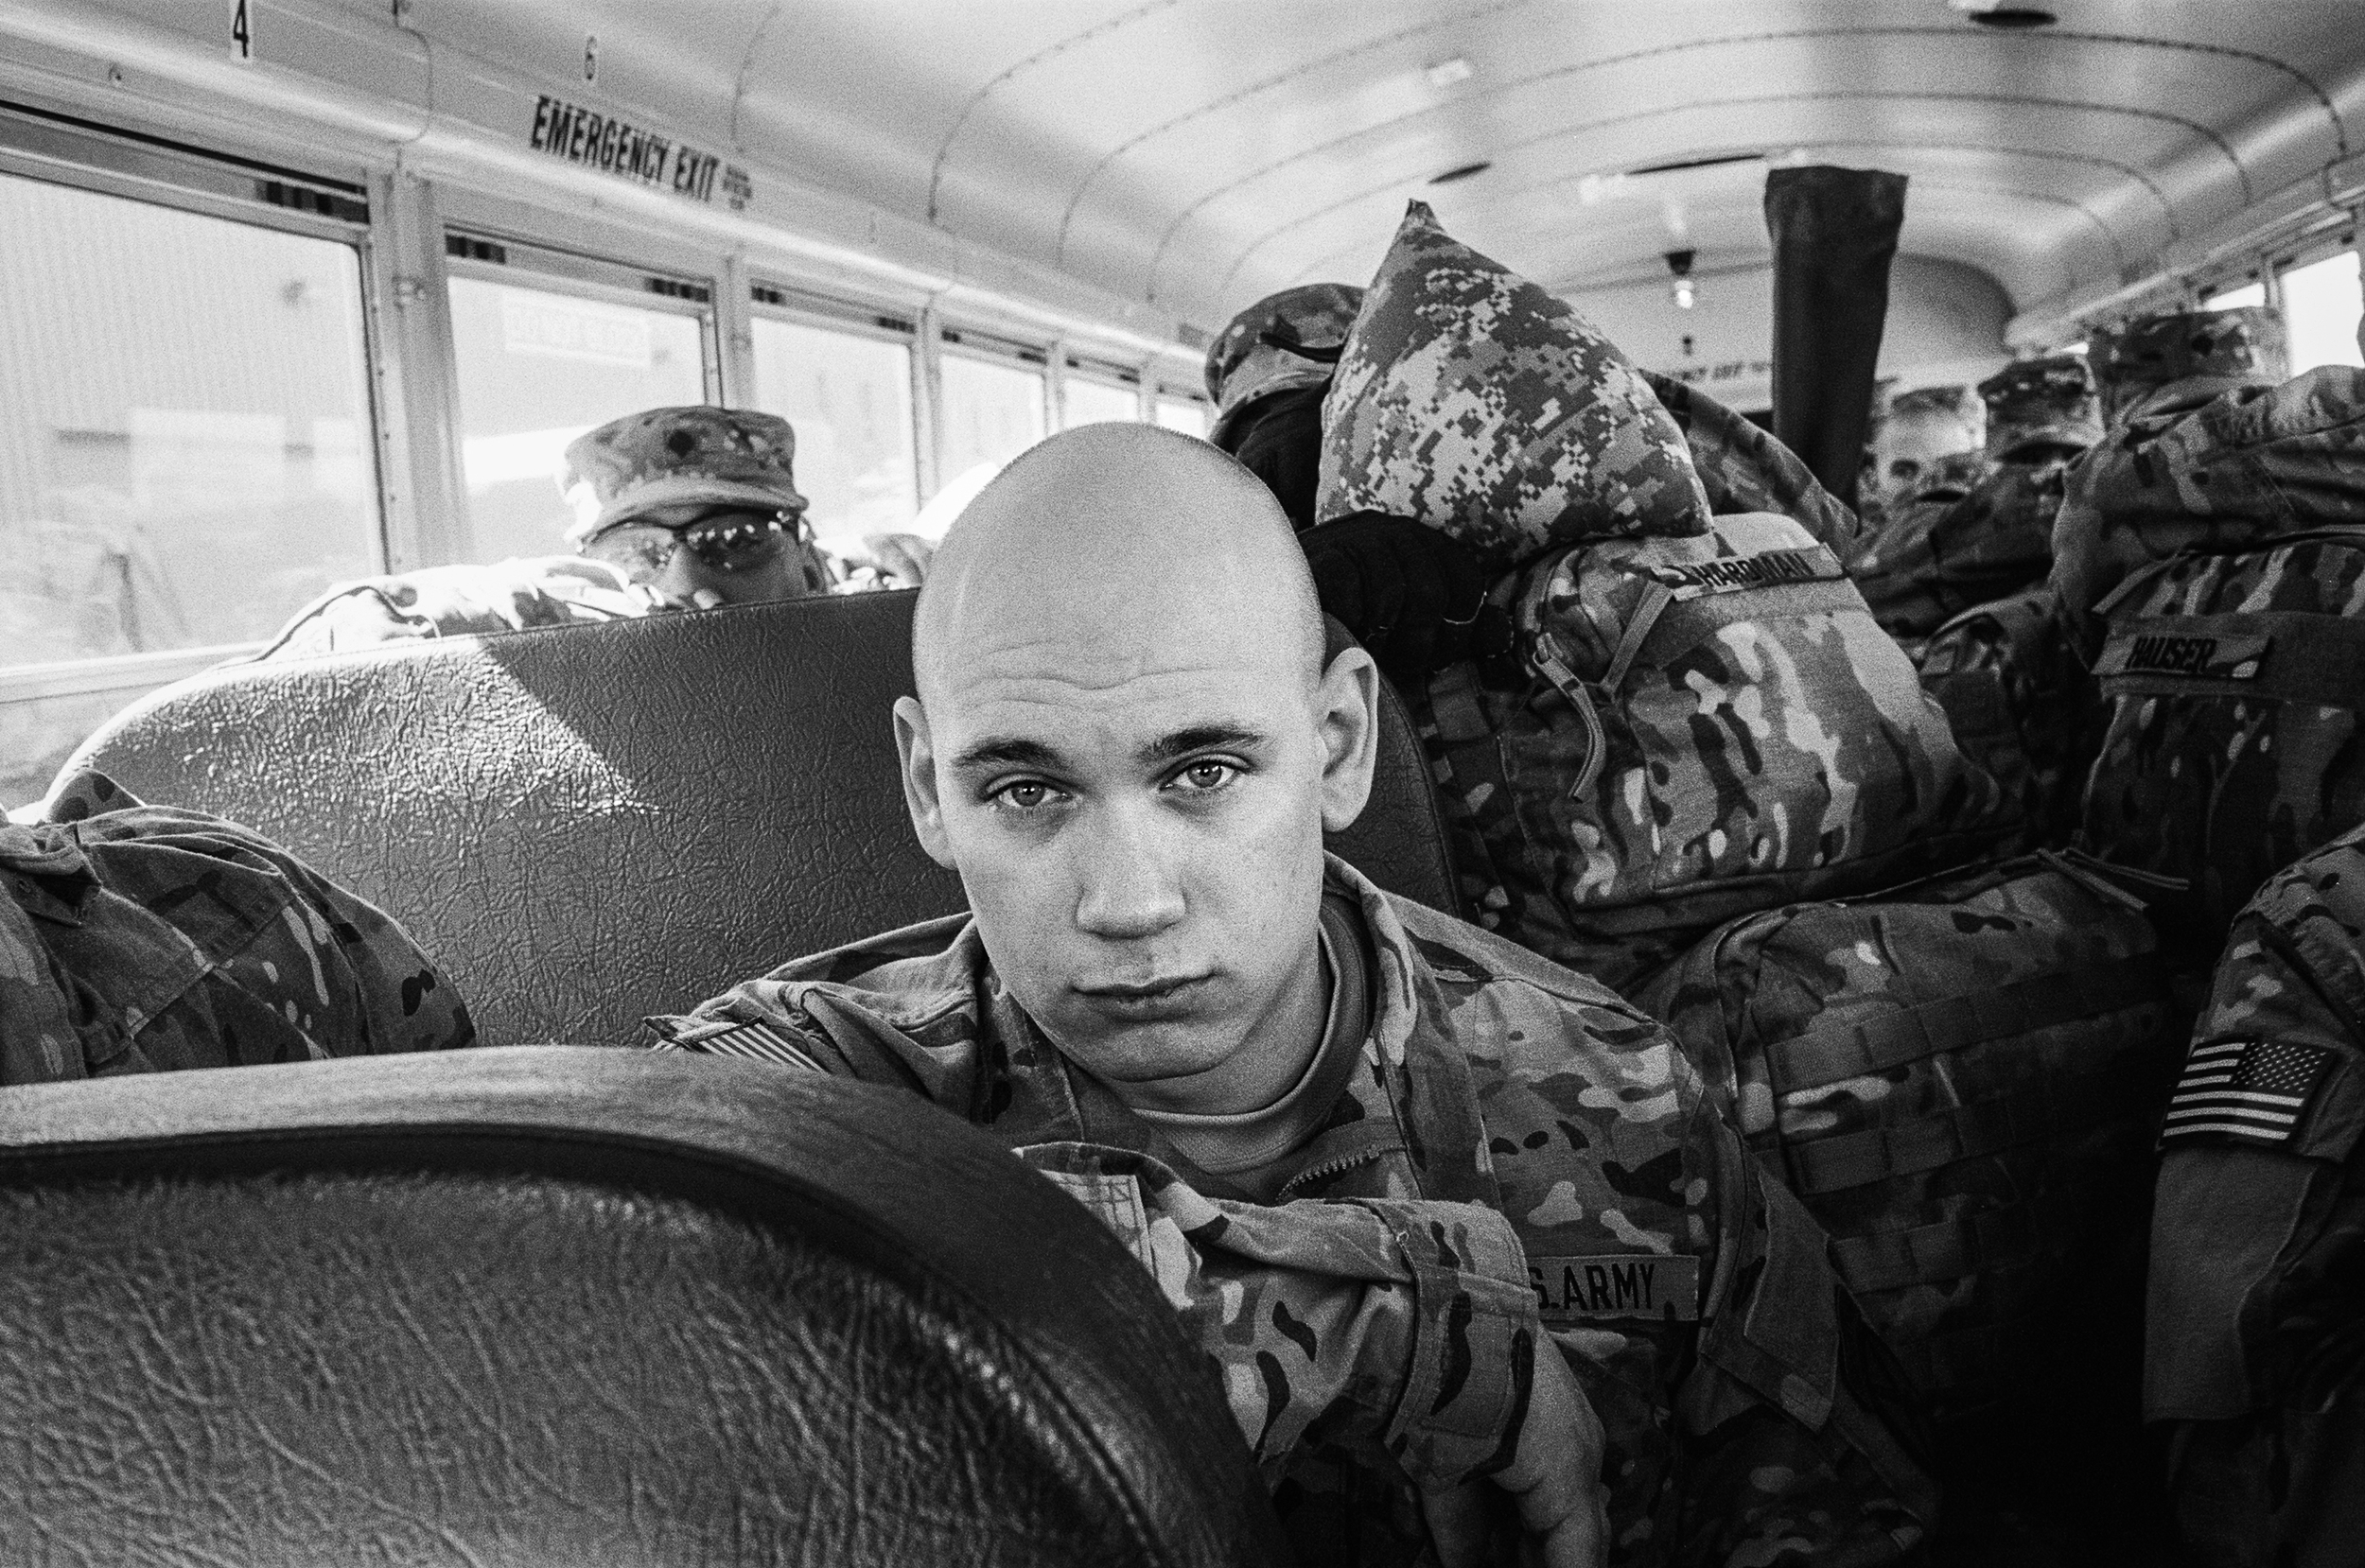  A soldier waits on a bus before deploying to Afghanistan,&nbsp;at Fort Drum, New York,&nbsp;2011. 